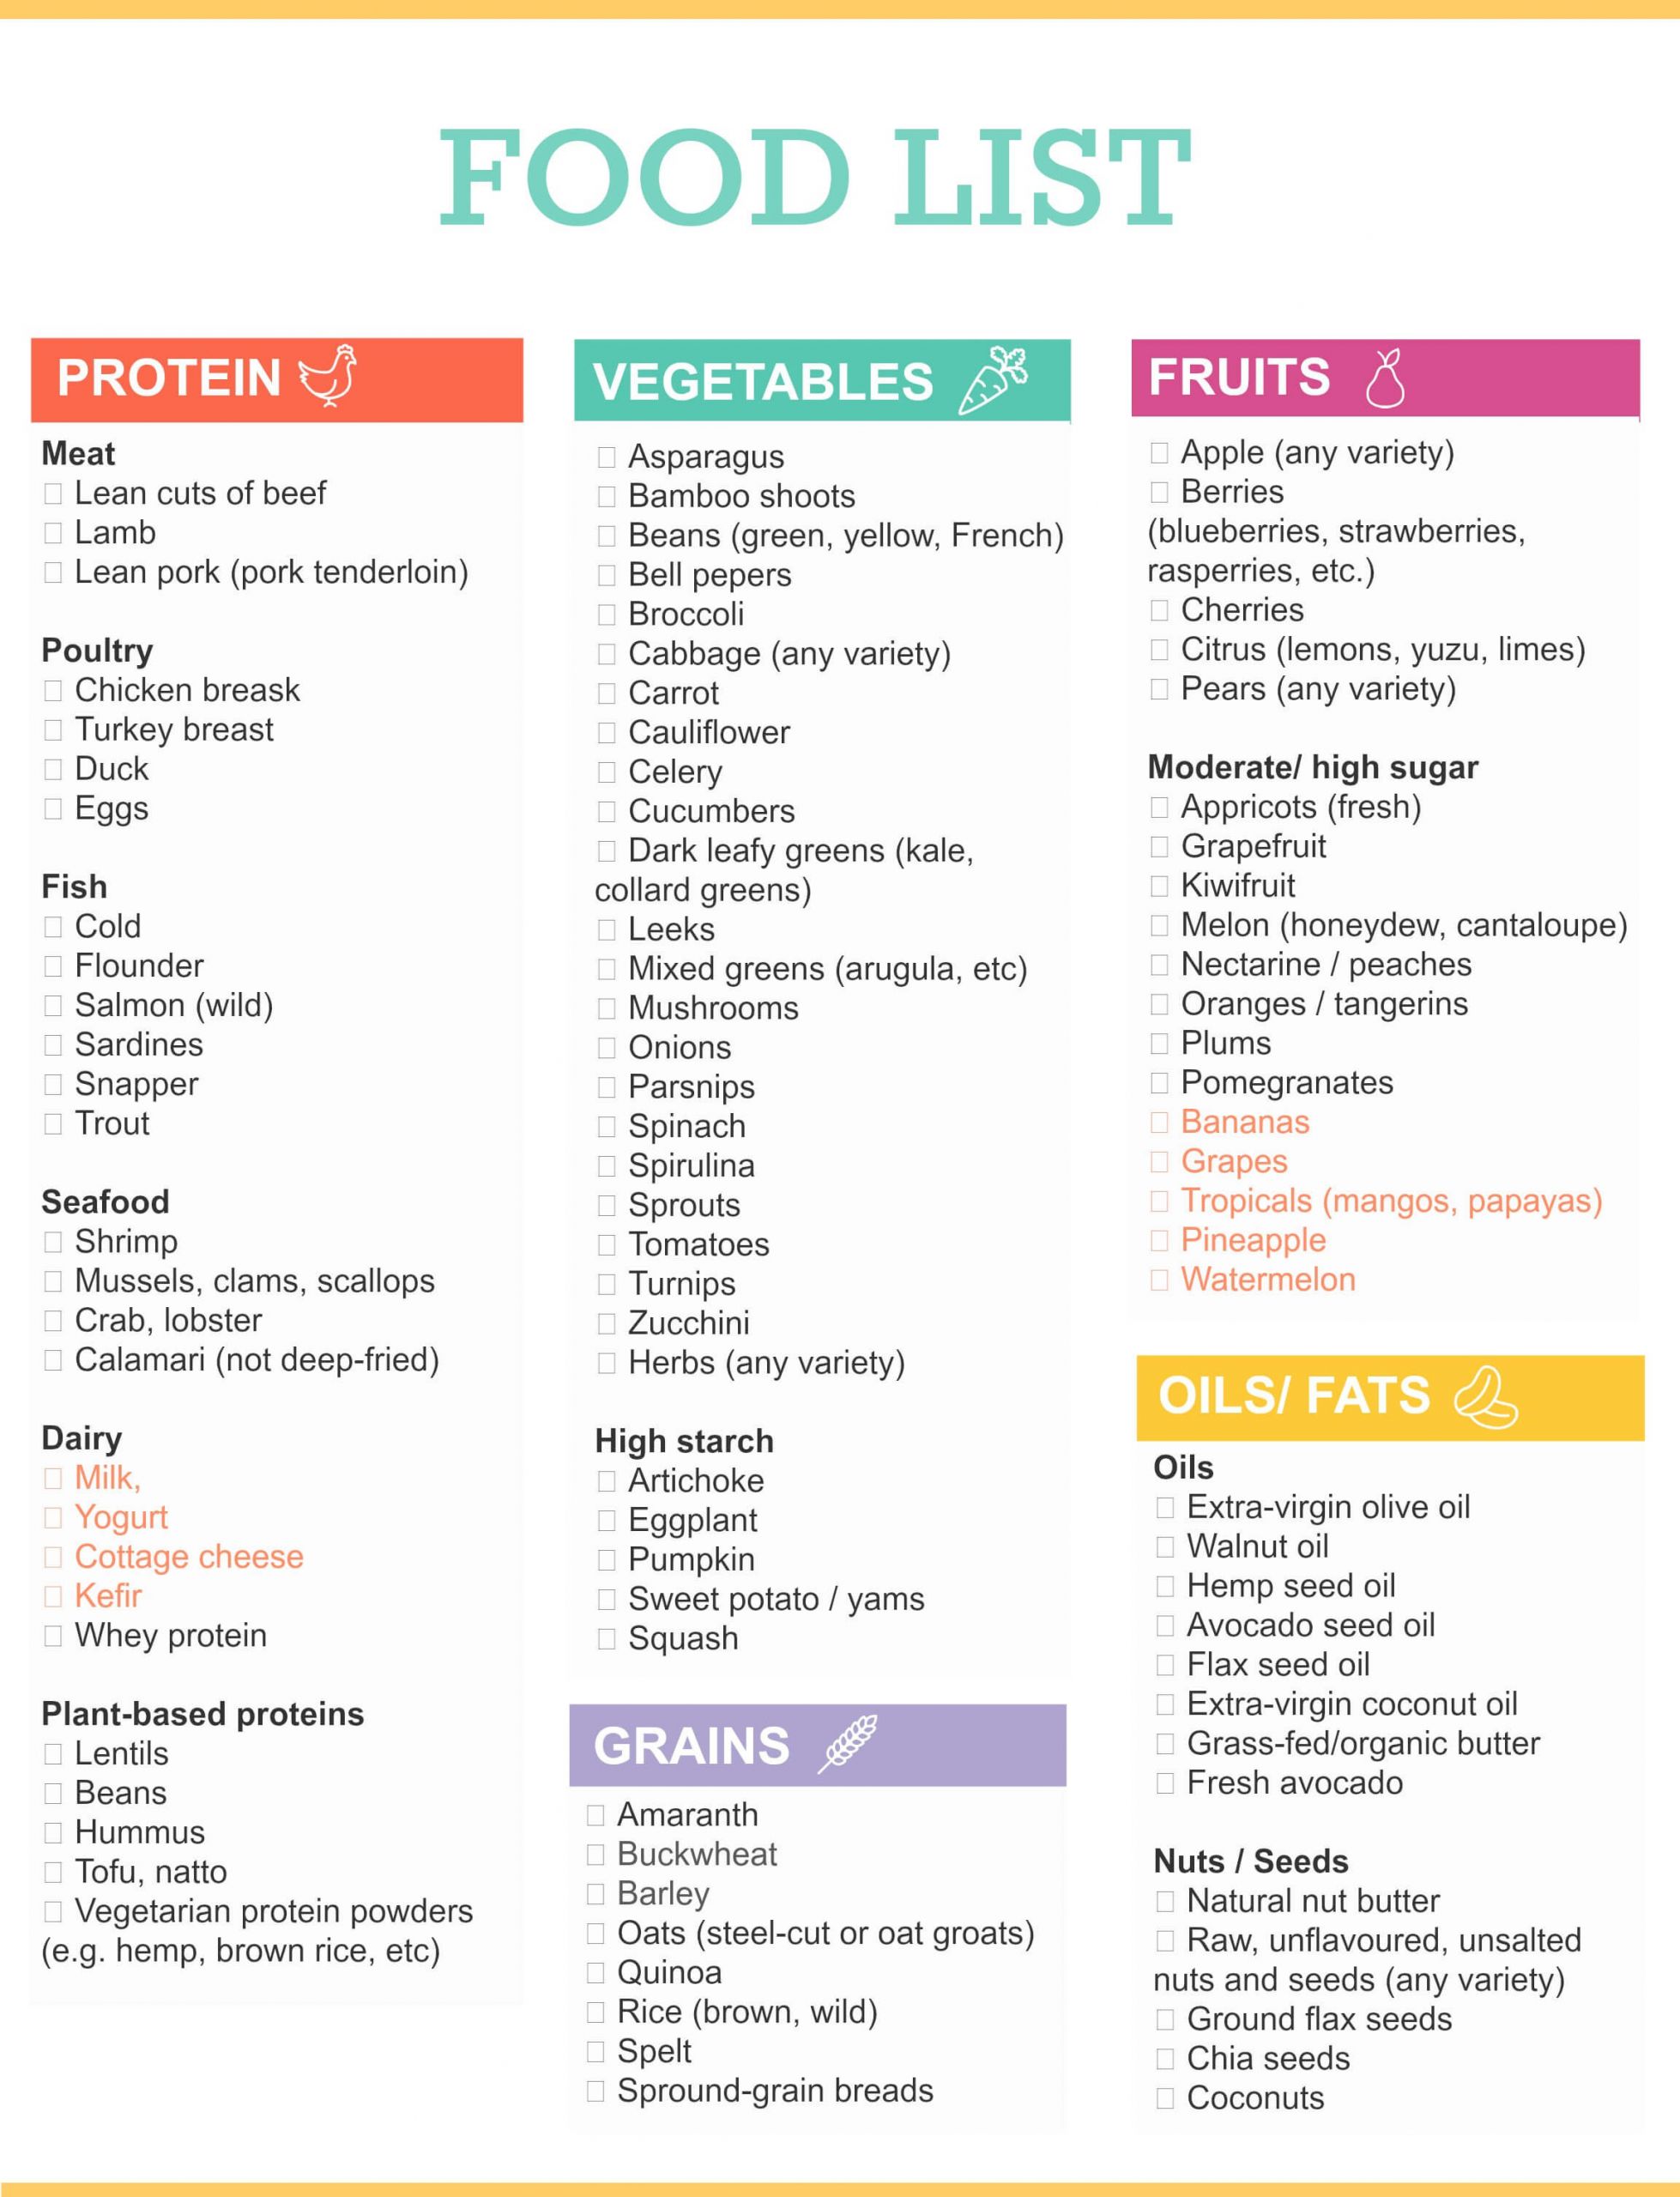 Low Fat Diet Grocery List The Ultimate Healthy Grocery List for Buying Healthy Foods